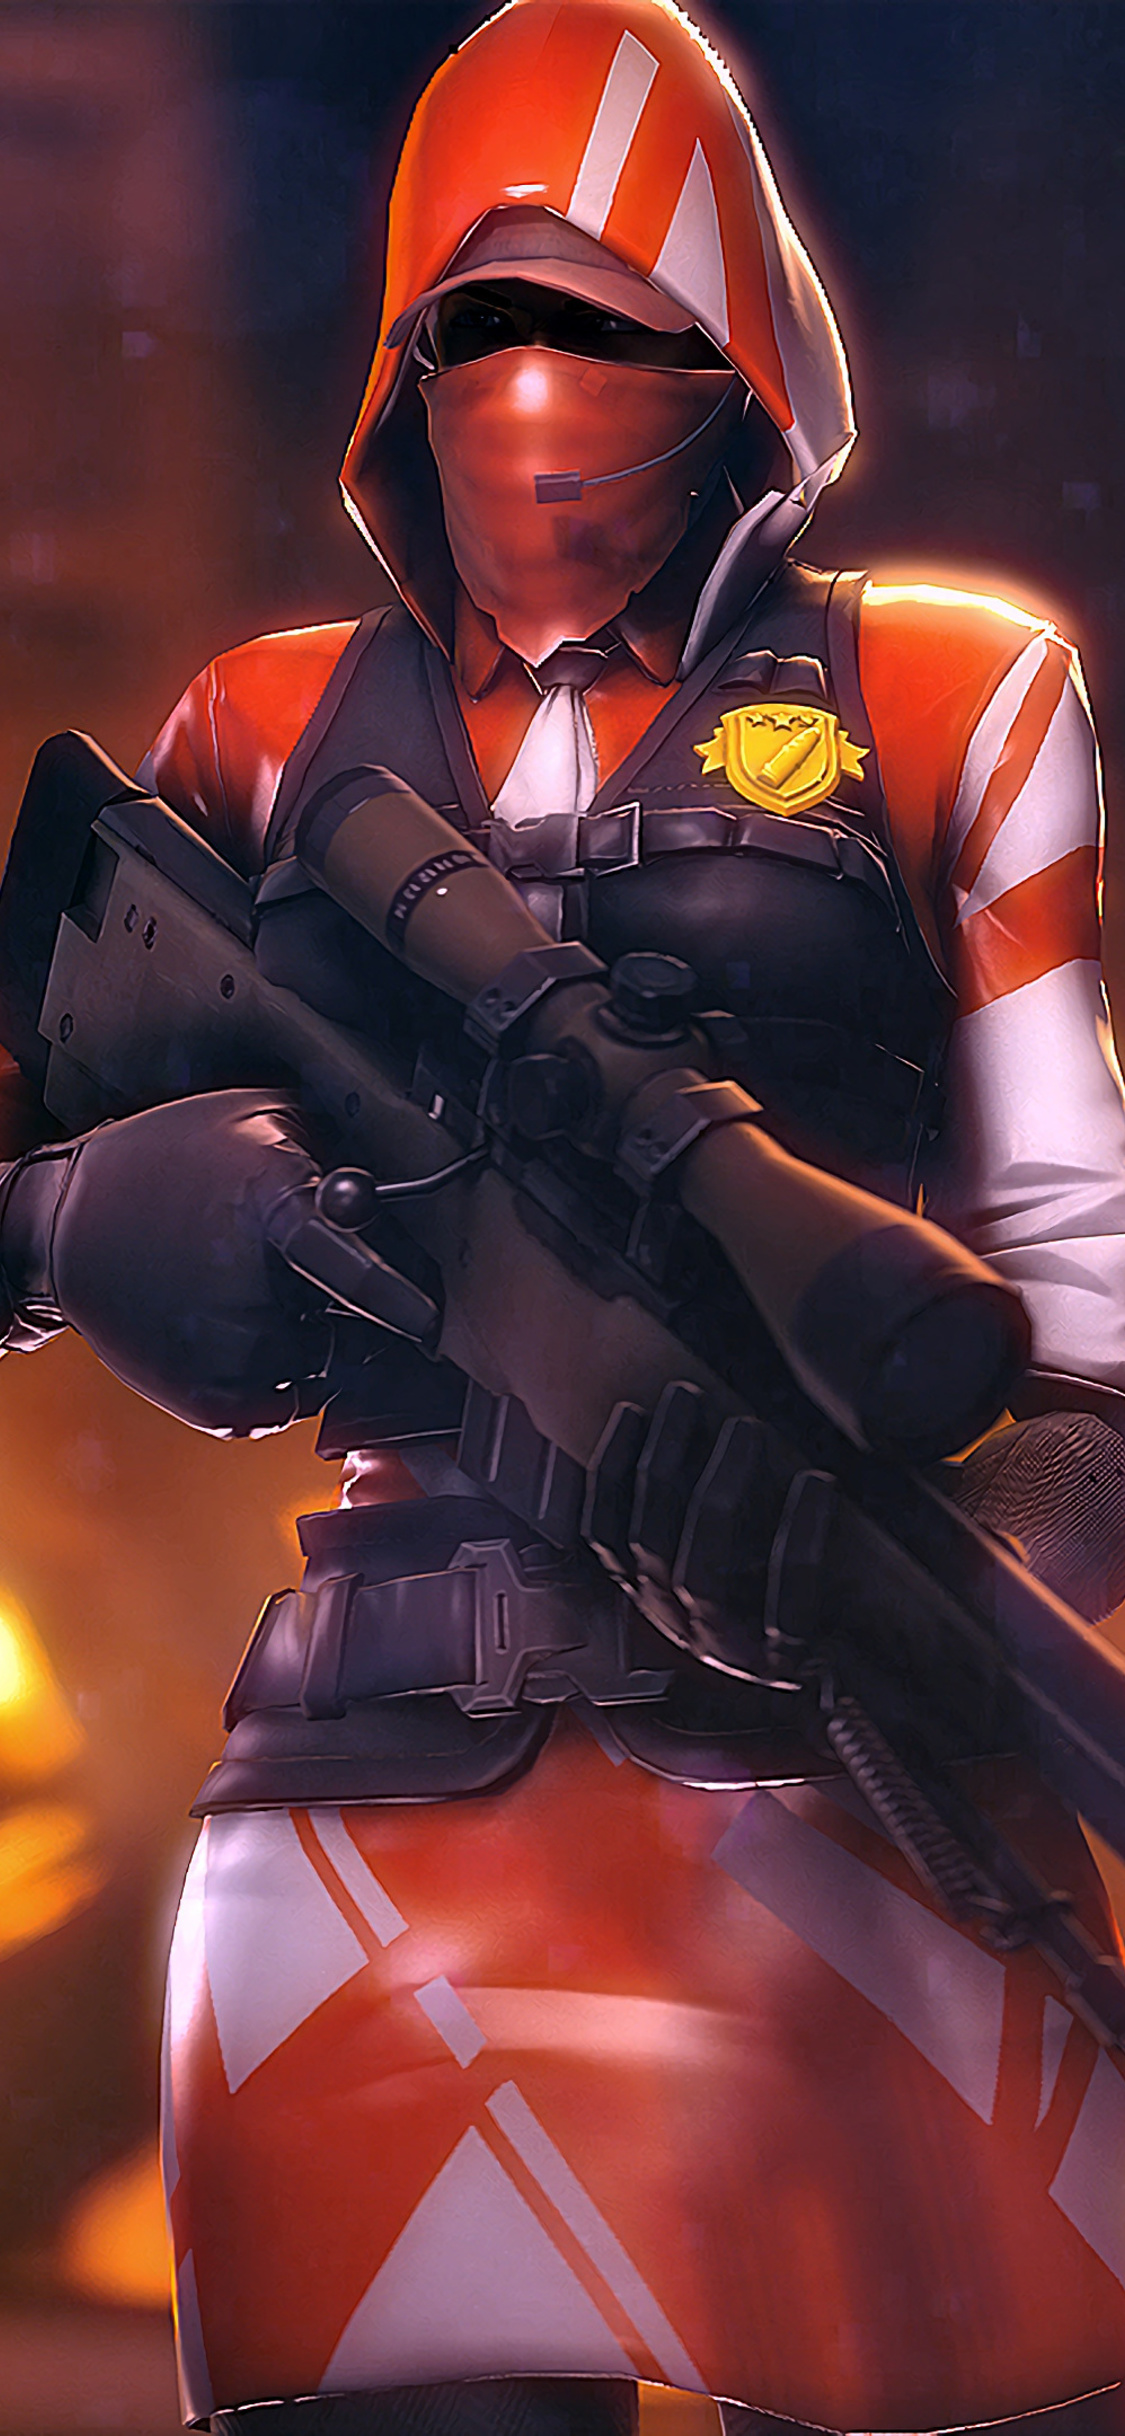 Free Download Ace Sniper Outfit Fortnite Iphone Background 4298 Wallpapers And 1125x2436 For Your Desktop Mobile Tablet Explore 28 The Ace Fortnite Wallpapers The Ace Fortnite Wallpapers Alpine Ace